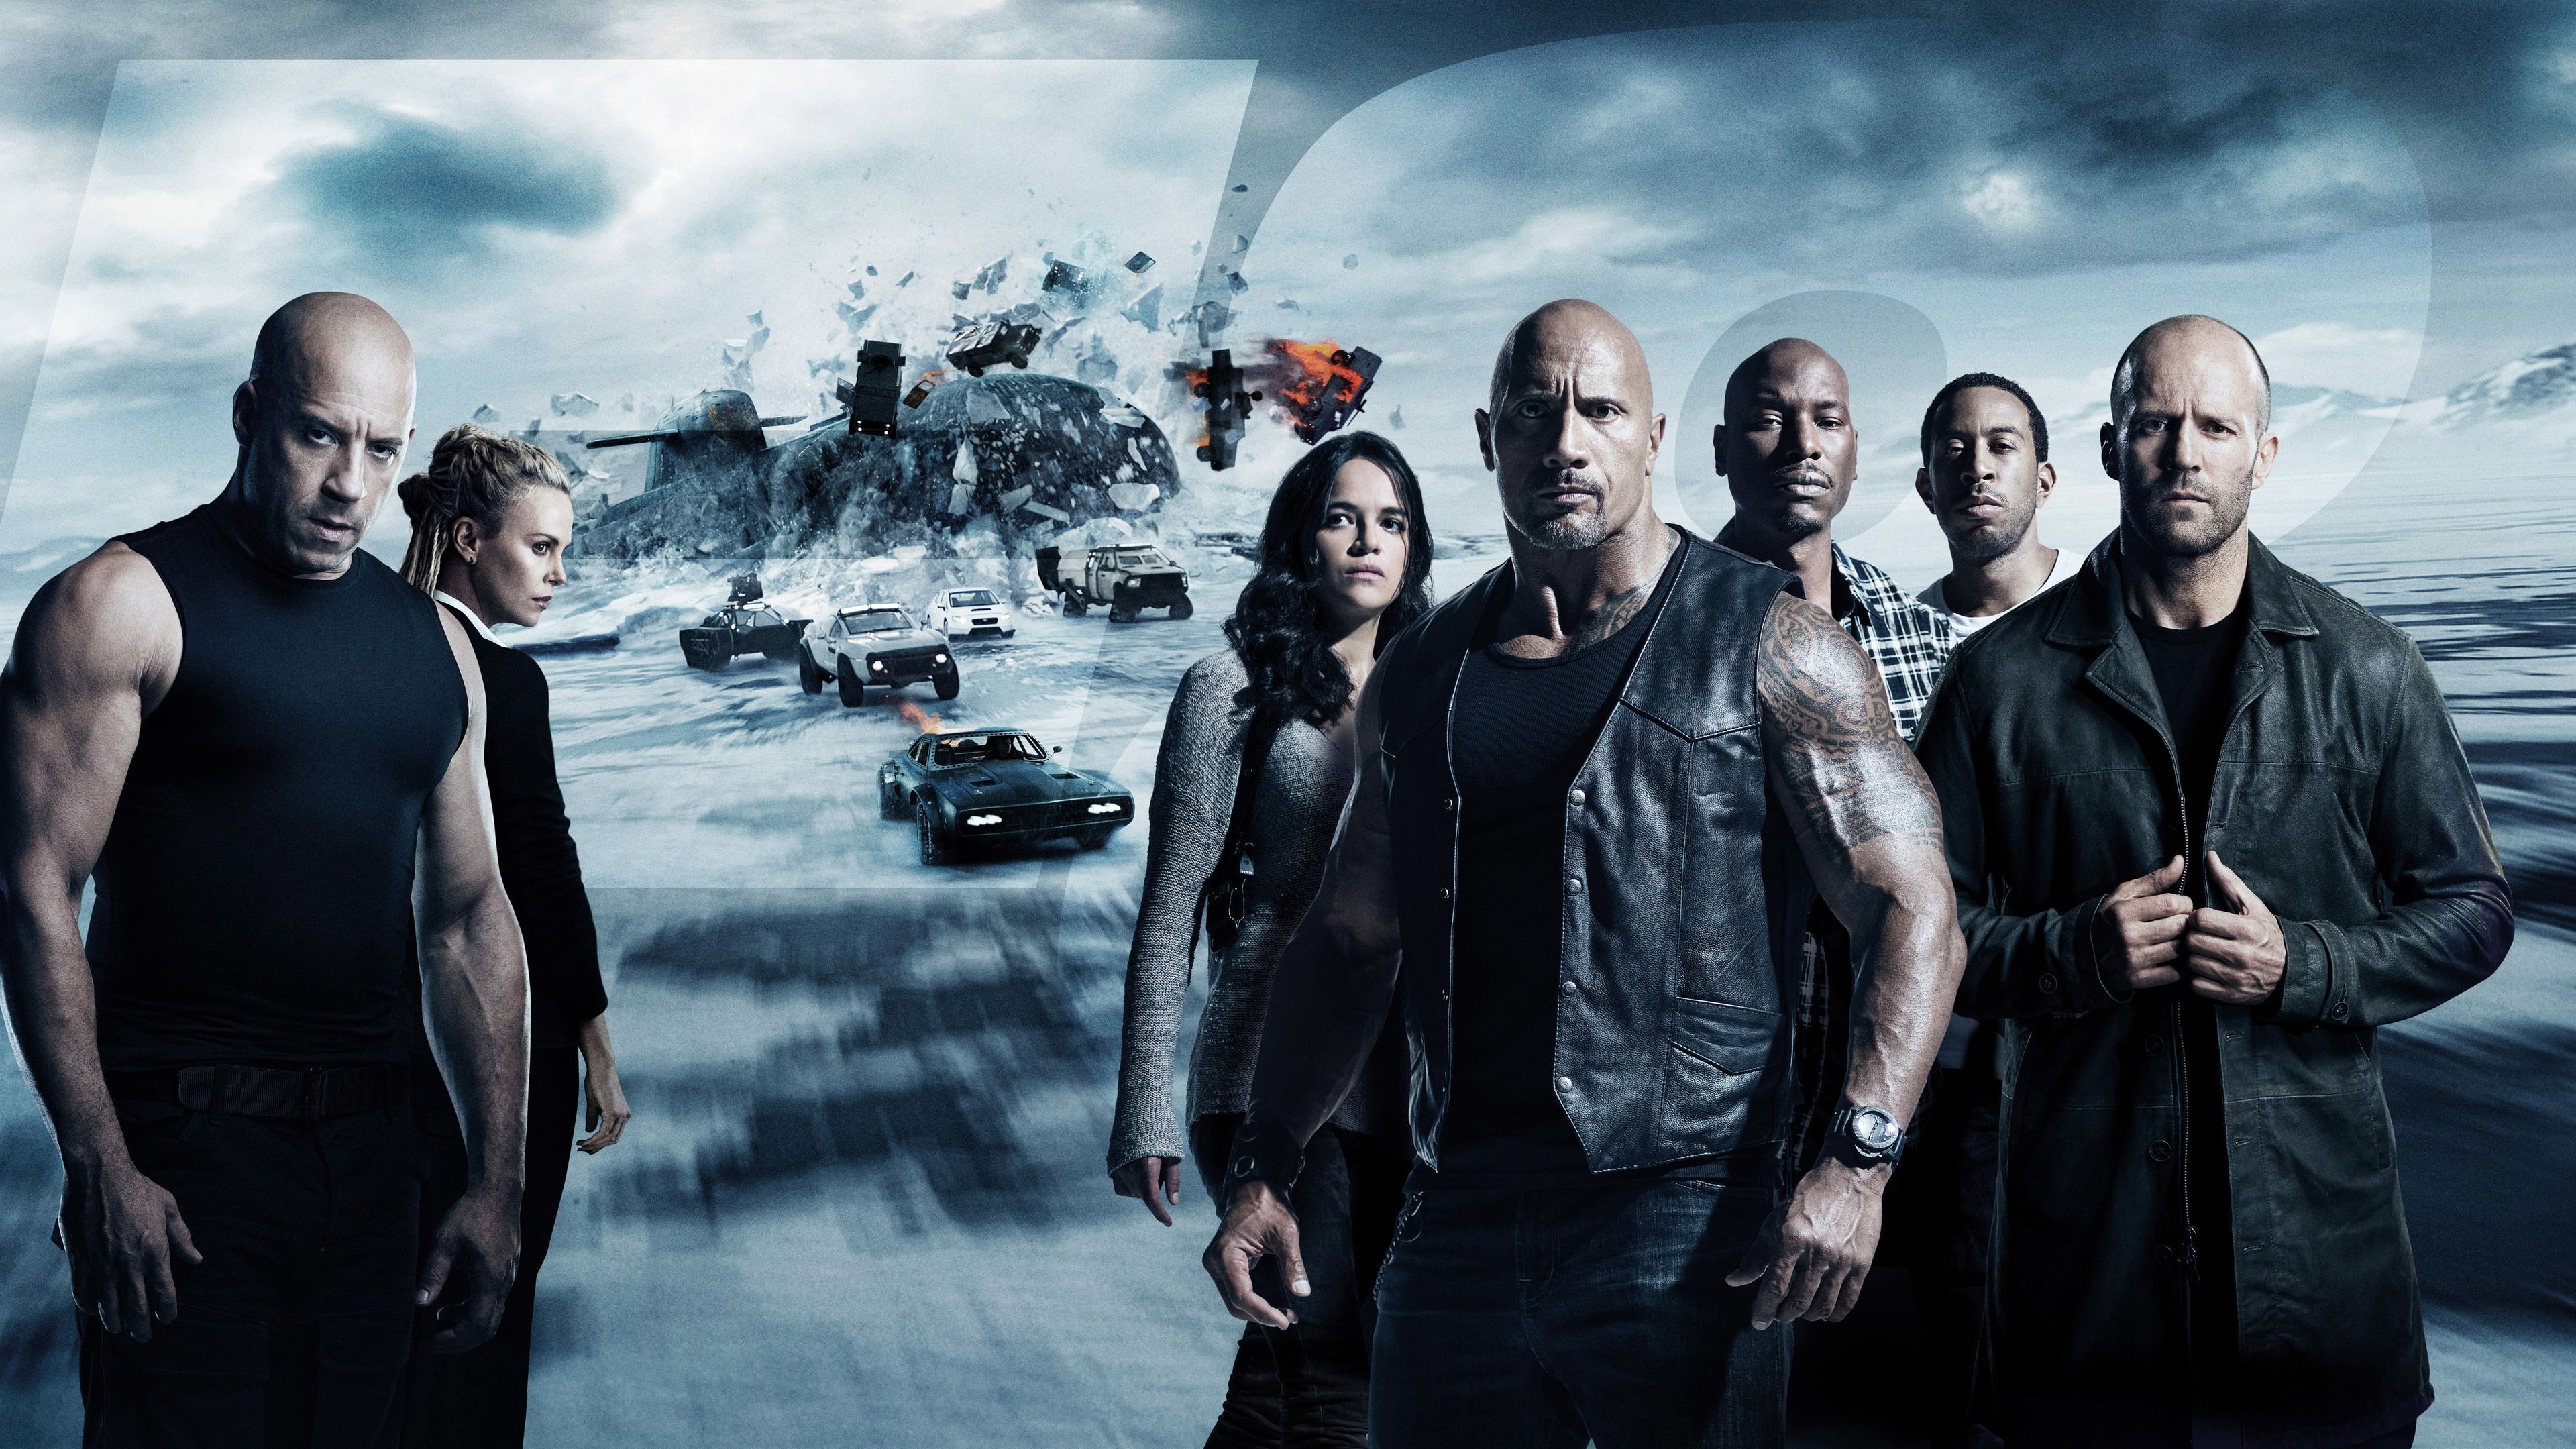 Wallpaper 4k The Fate Of The Furious 2017 5k Movie 2017 movies